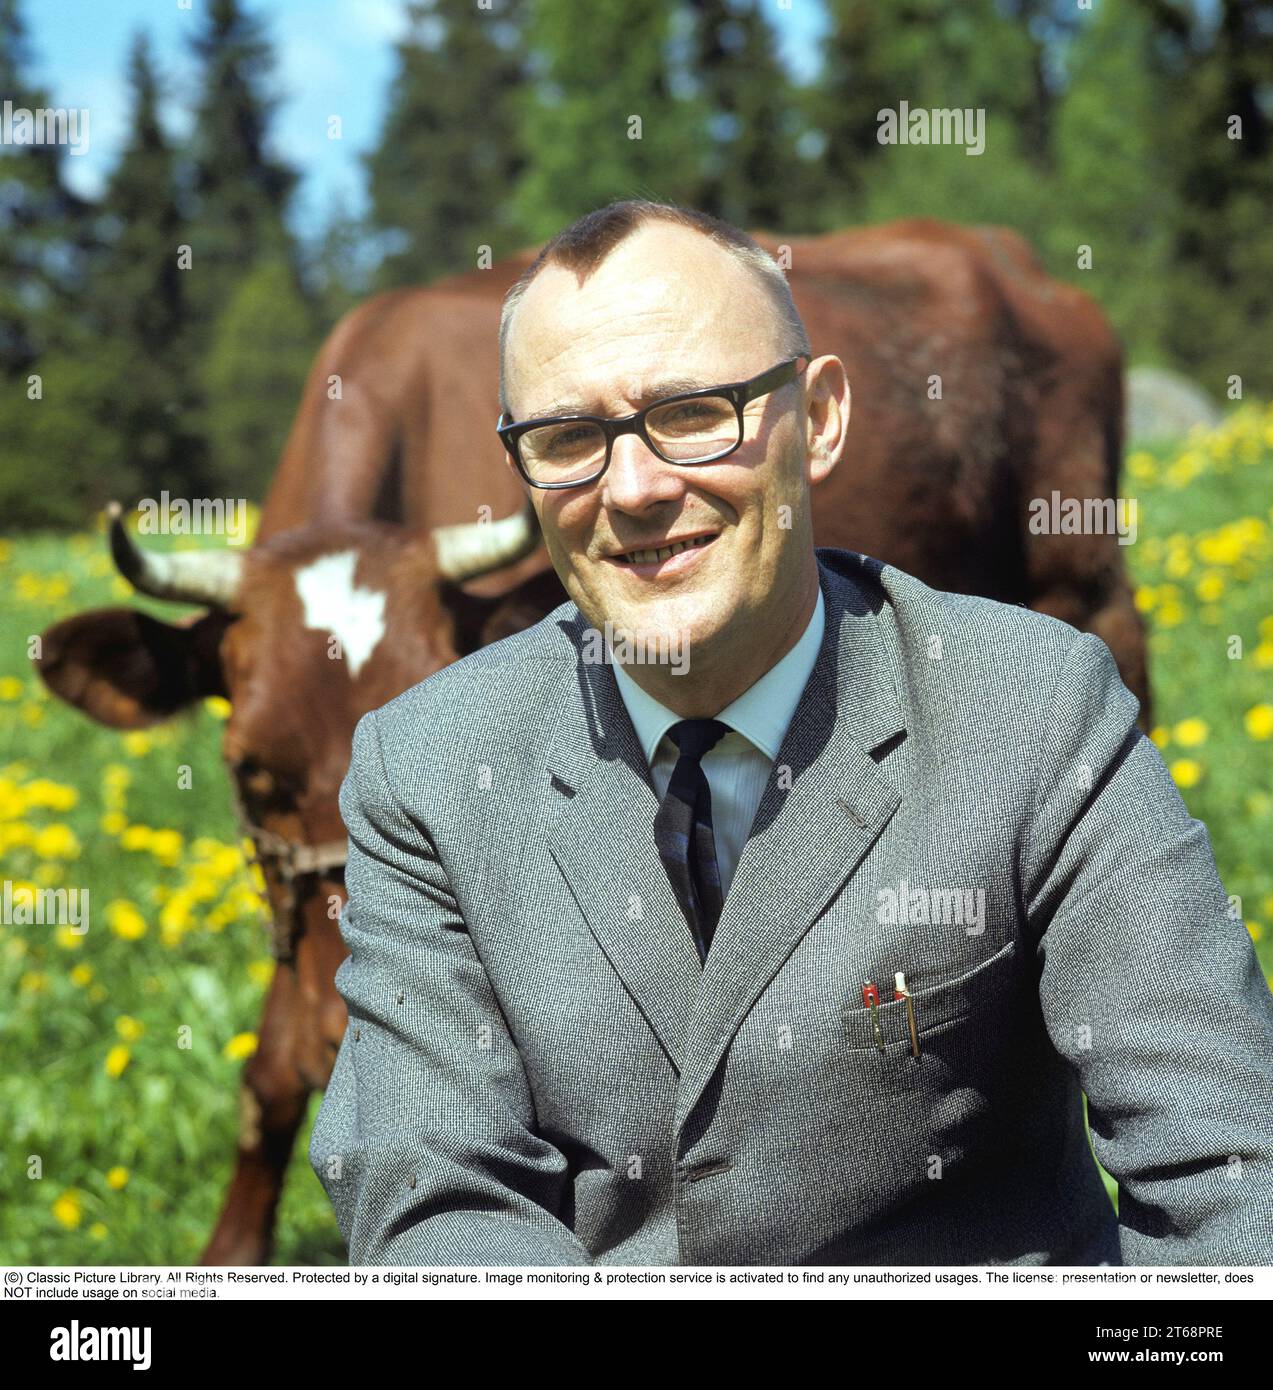 Feodor Ingvar Kamprad. 30 March 1926 – 27 January 2018) was a Swedish billionaire business magnate best known for founding IKEA, a multinational retail company specialising in furniture. Pictured outside his home town of Älmhult Småland Sweden 1968. Roland Palm ref 2-11-6 Stock Photo